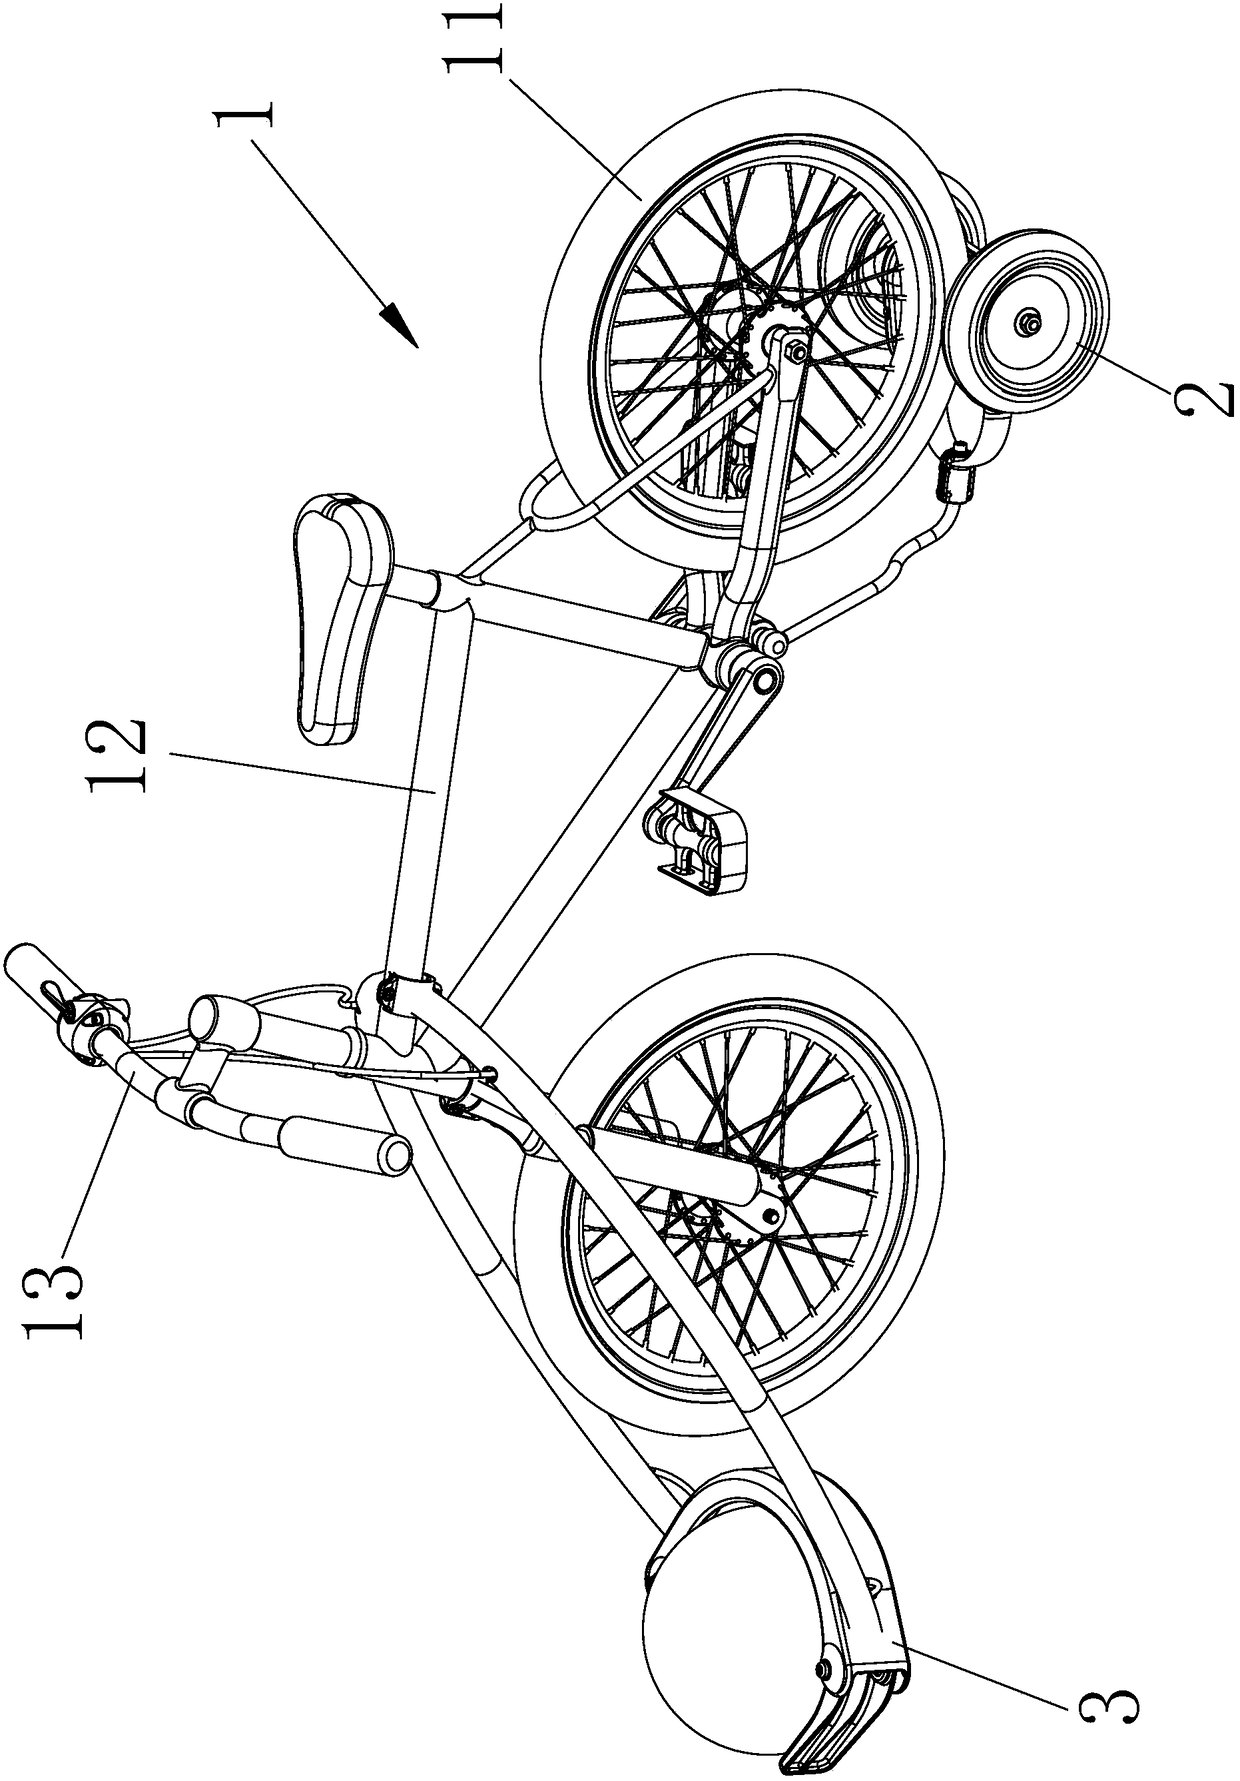 Single-roller and double-wheel bicycle game device